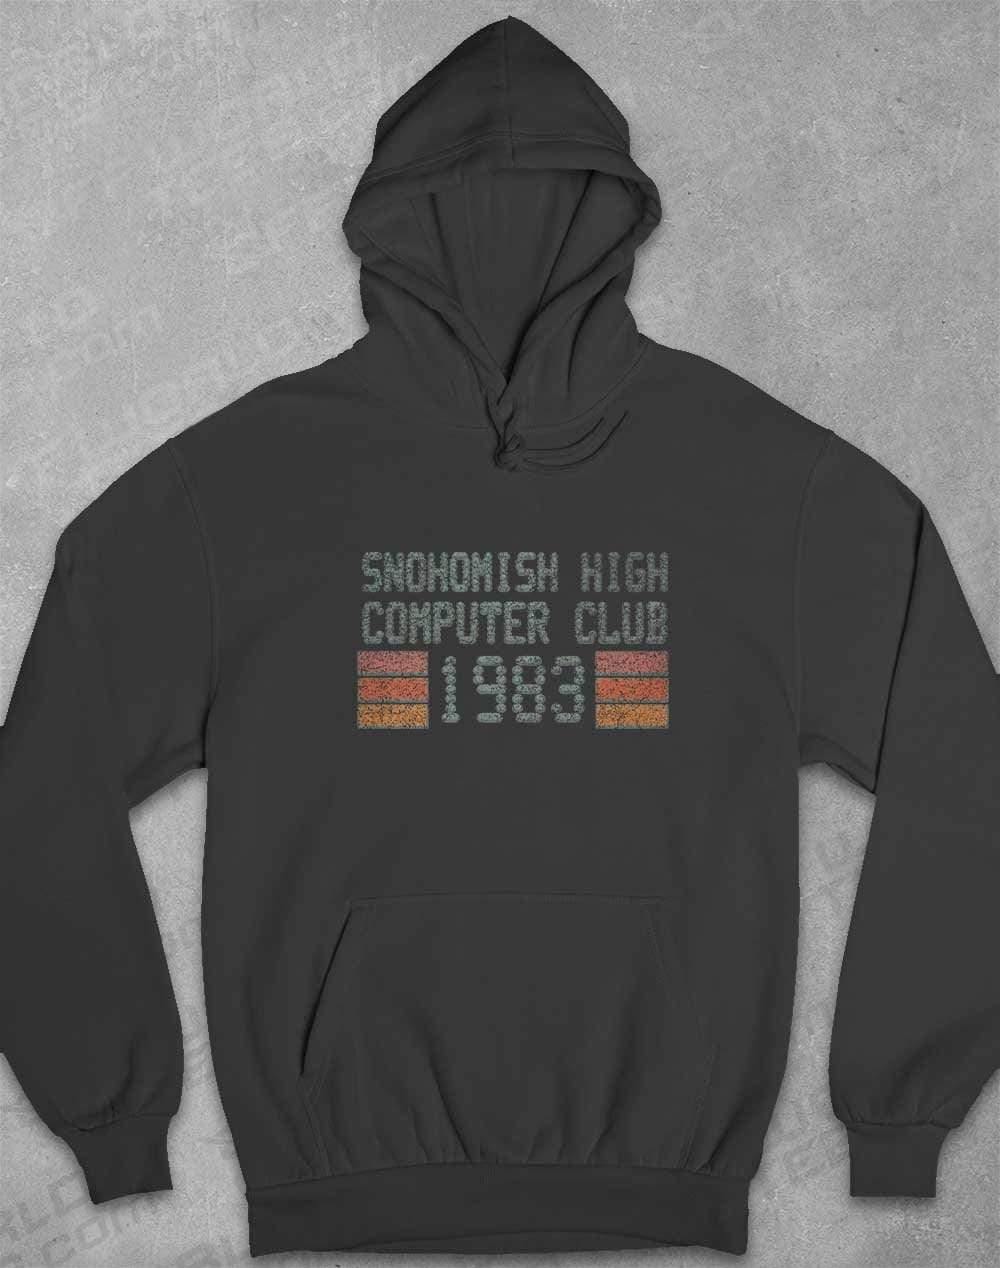 Snohomish High Computer Club Hoodie XS / Charcoal  - Off World Tees